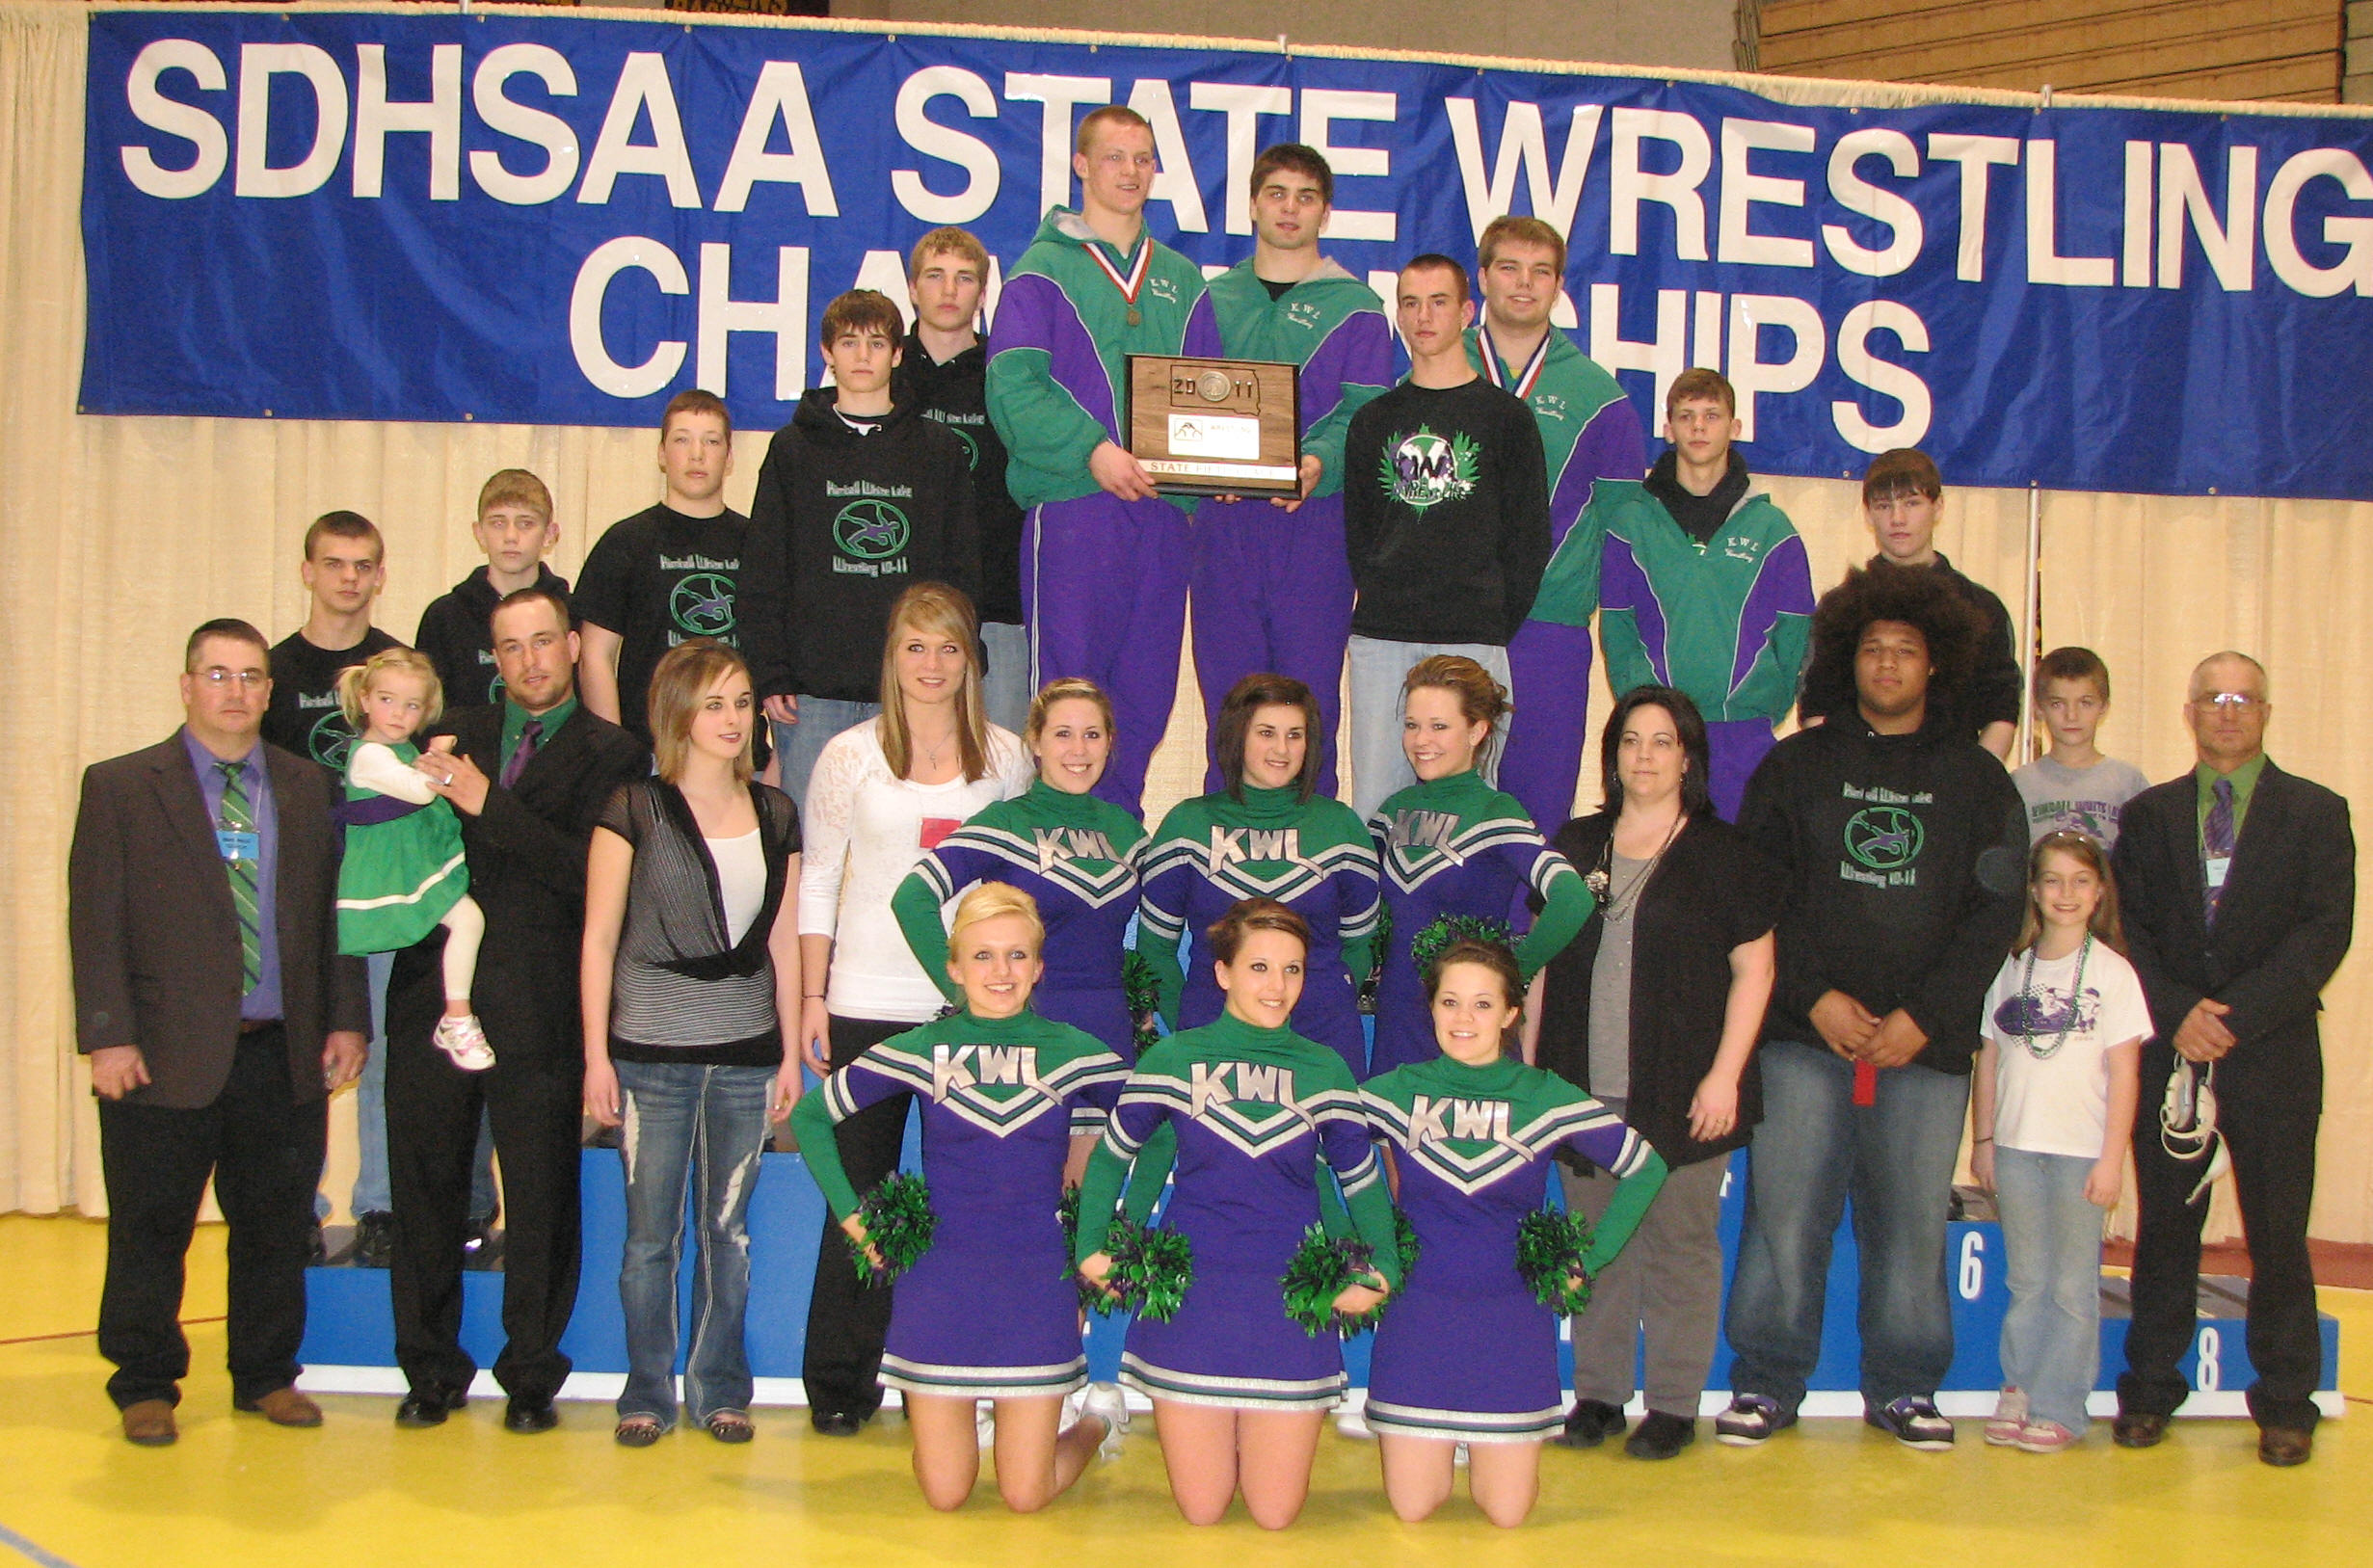 5th Place Wrestling Team